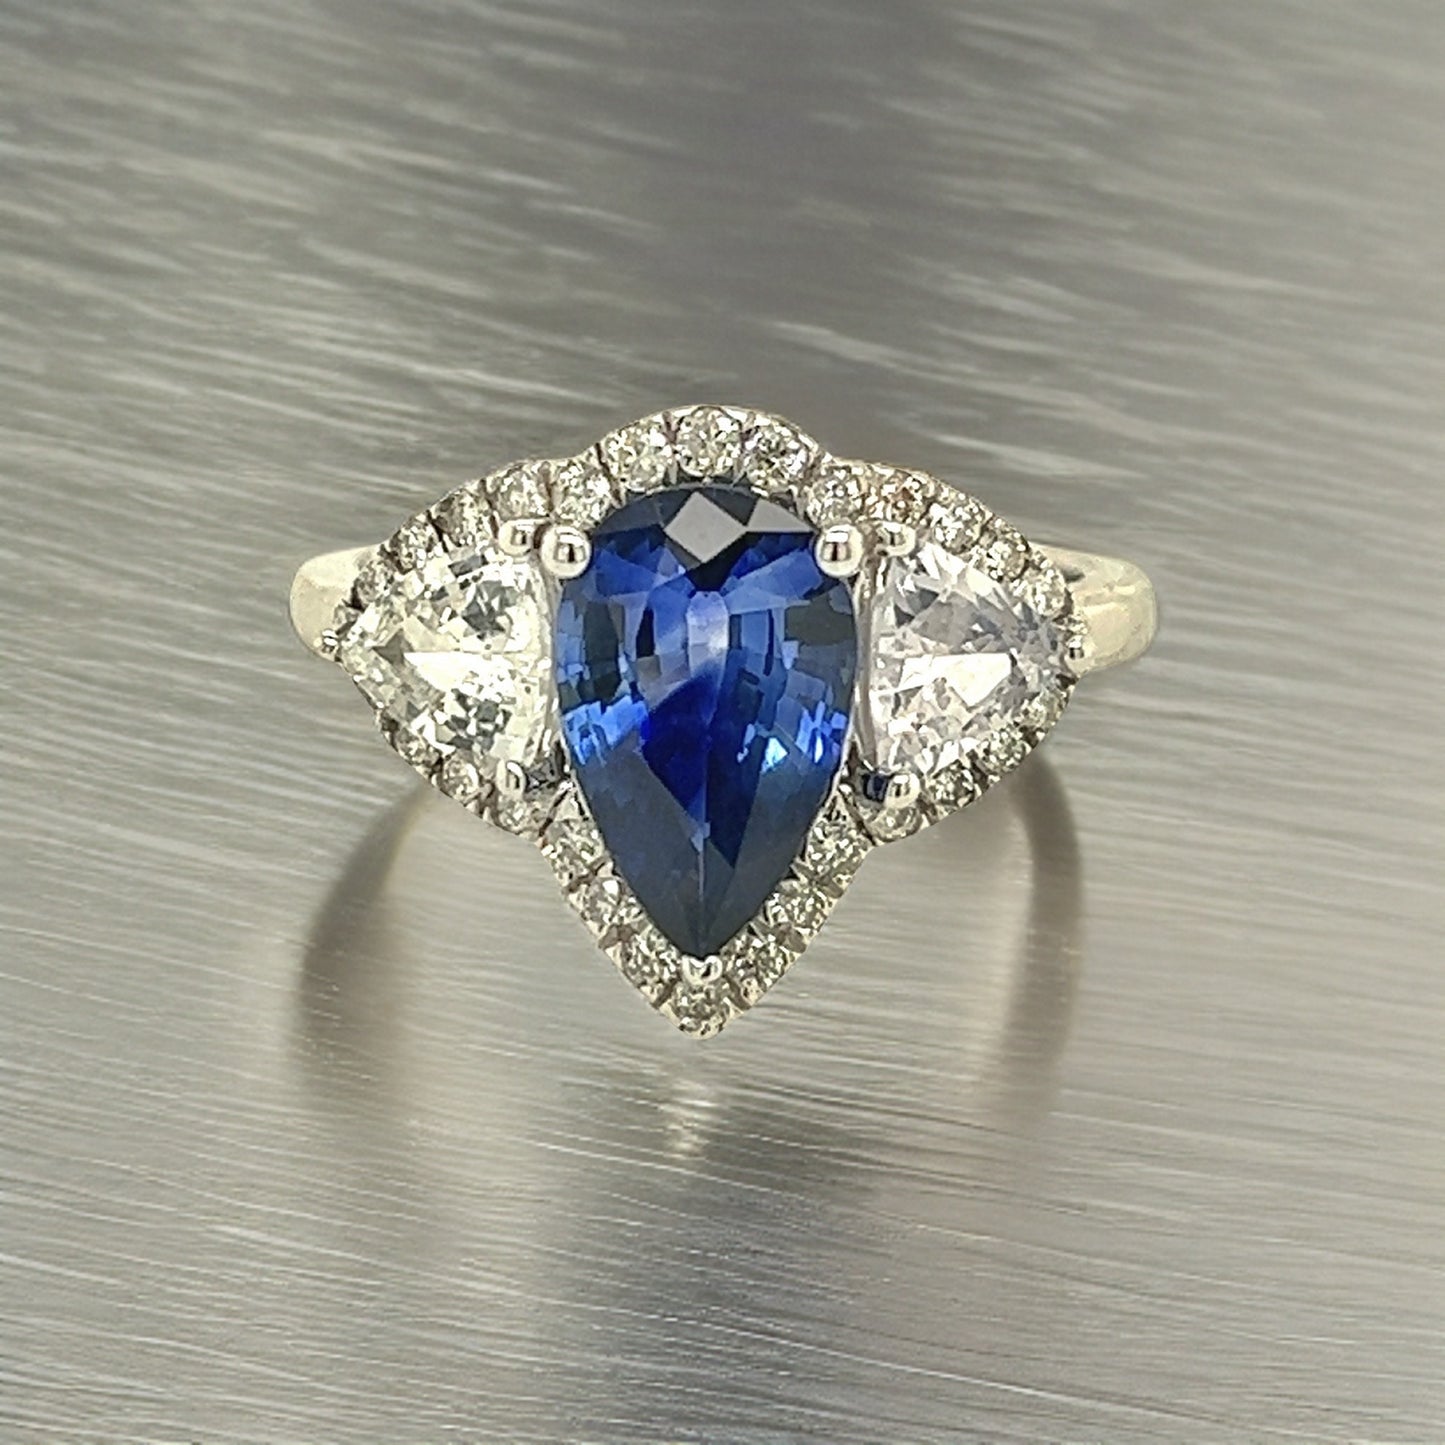 Natural Sapphire Diamond Ring Size 6.5 14k W Gold 2.78 TCW Certified $5,975 219221